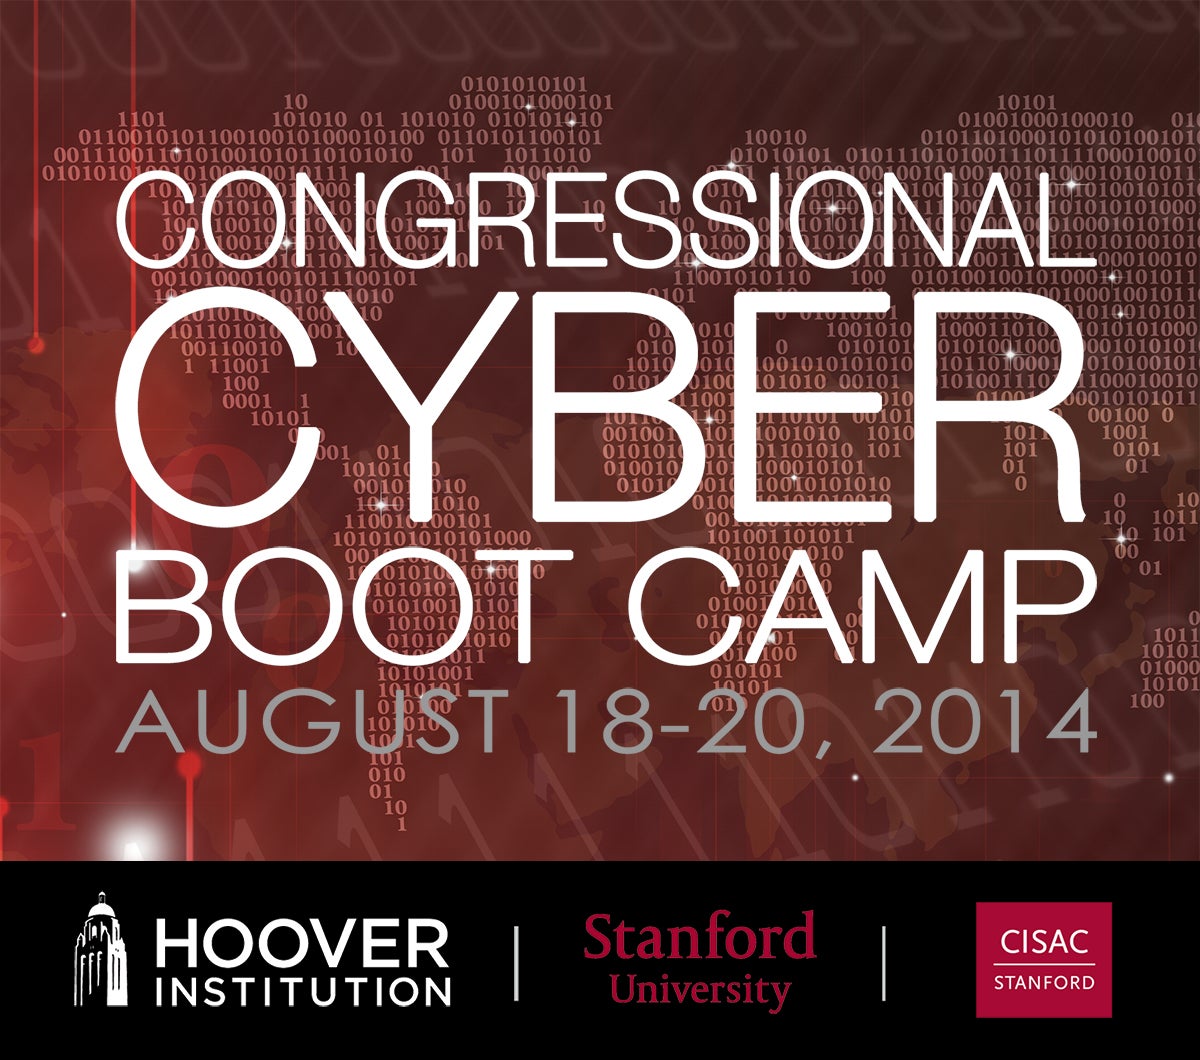 Image for Inaugural Congressional Cyber Boot Camp 2014